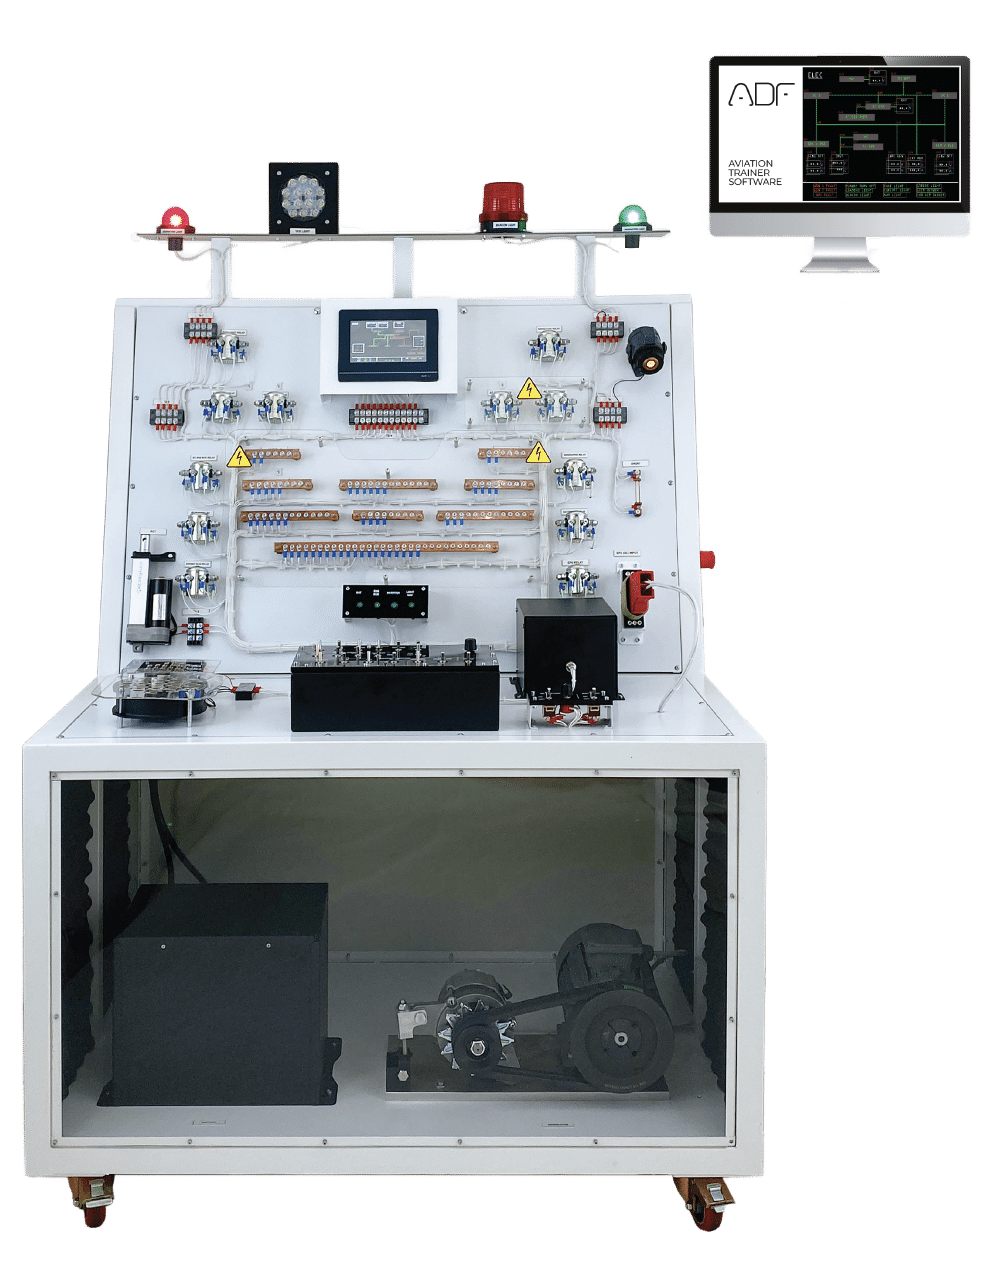 Aircraft Maintenance - Electrical Training System for Single Engine Aircraft